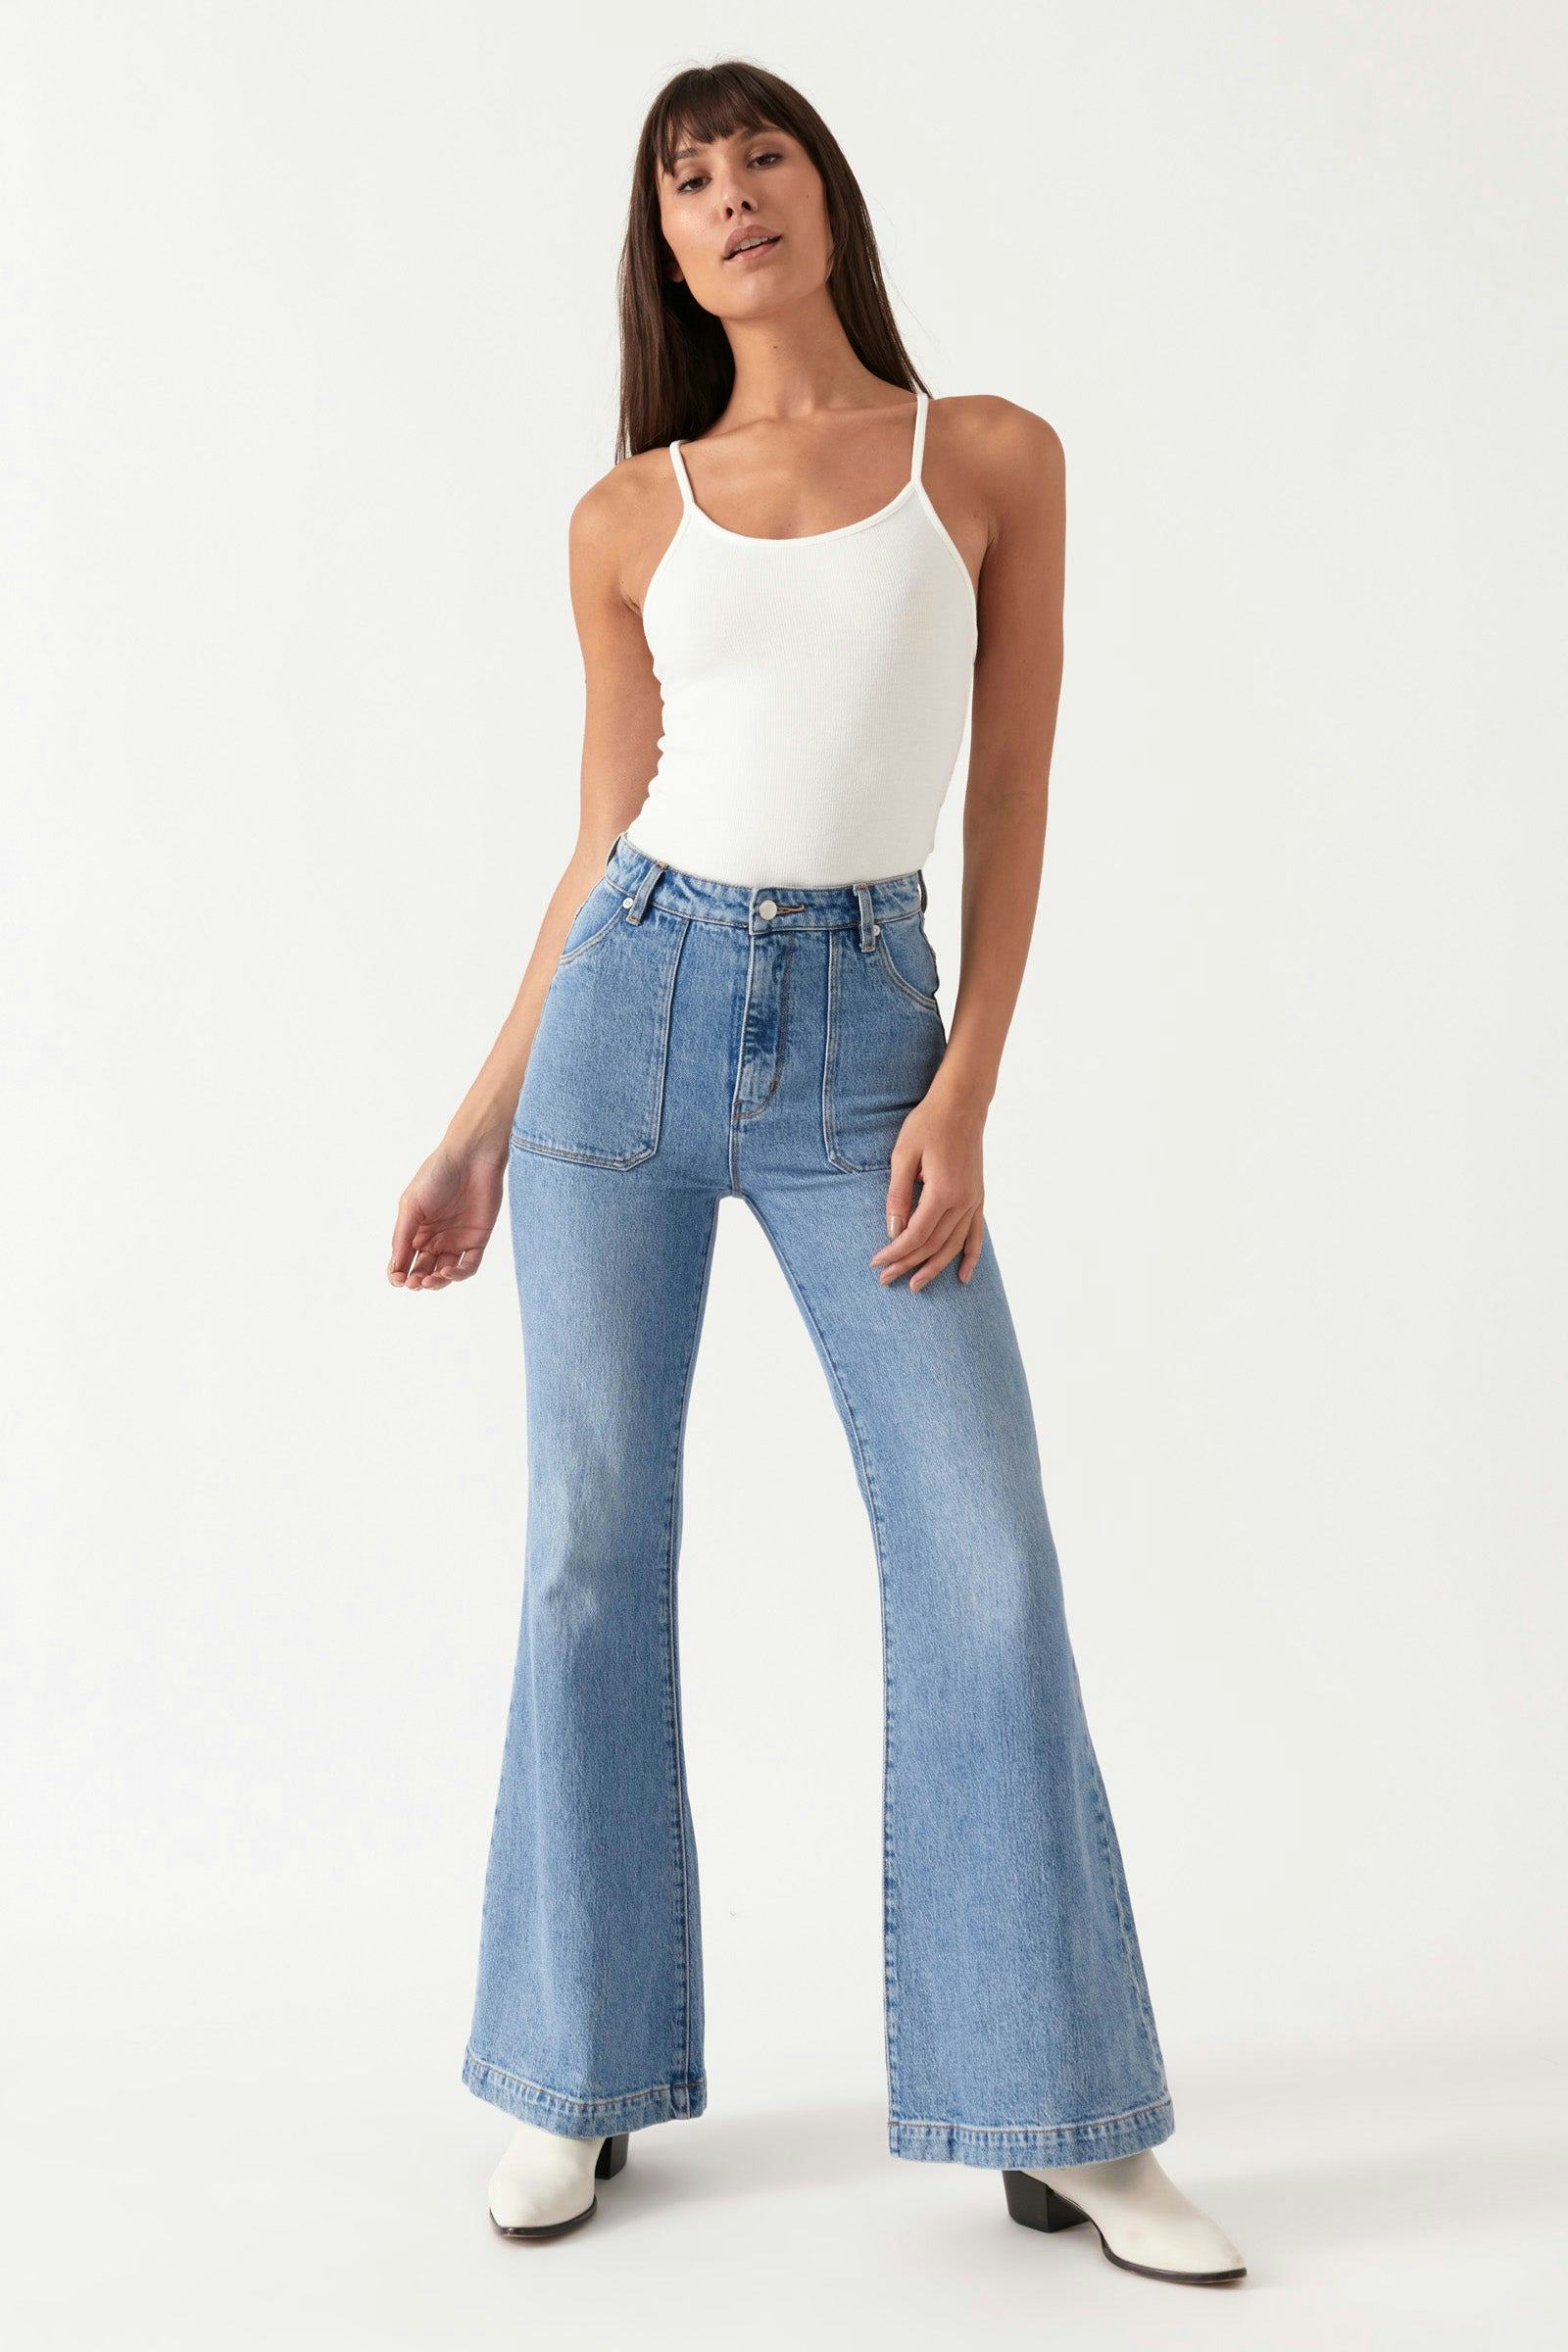 Leather Mid-Rise Flared Trousers ‐ Phix